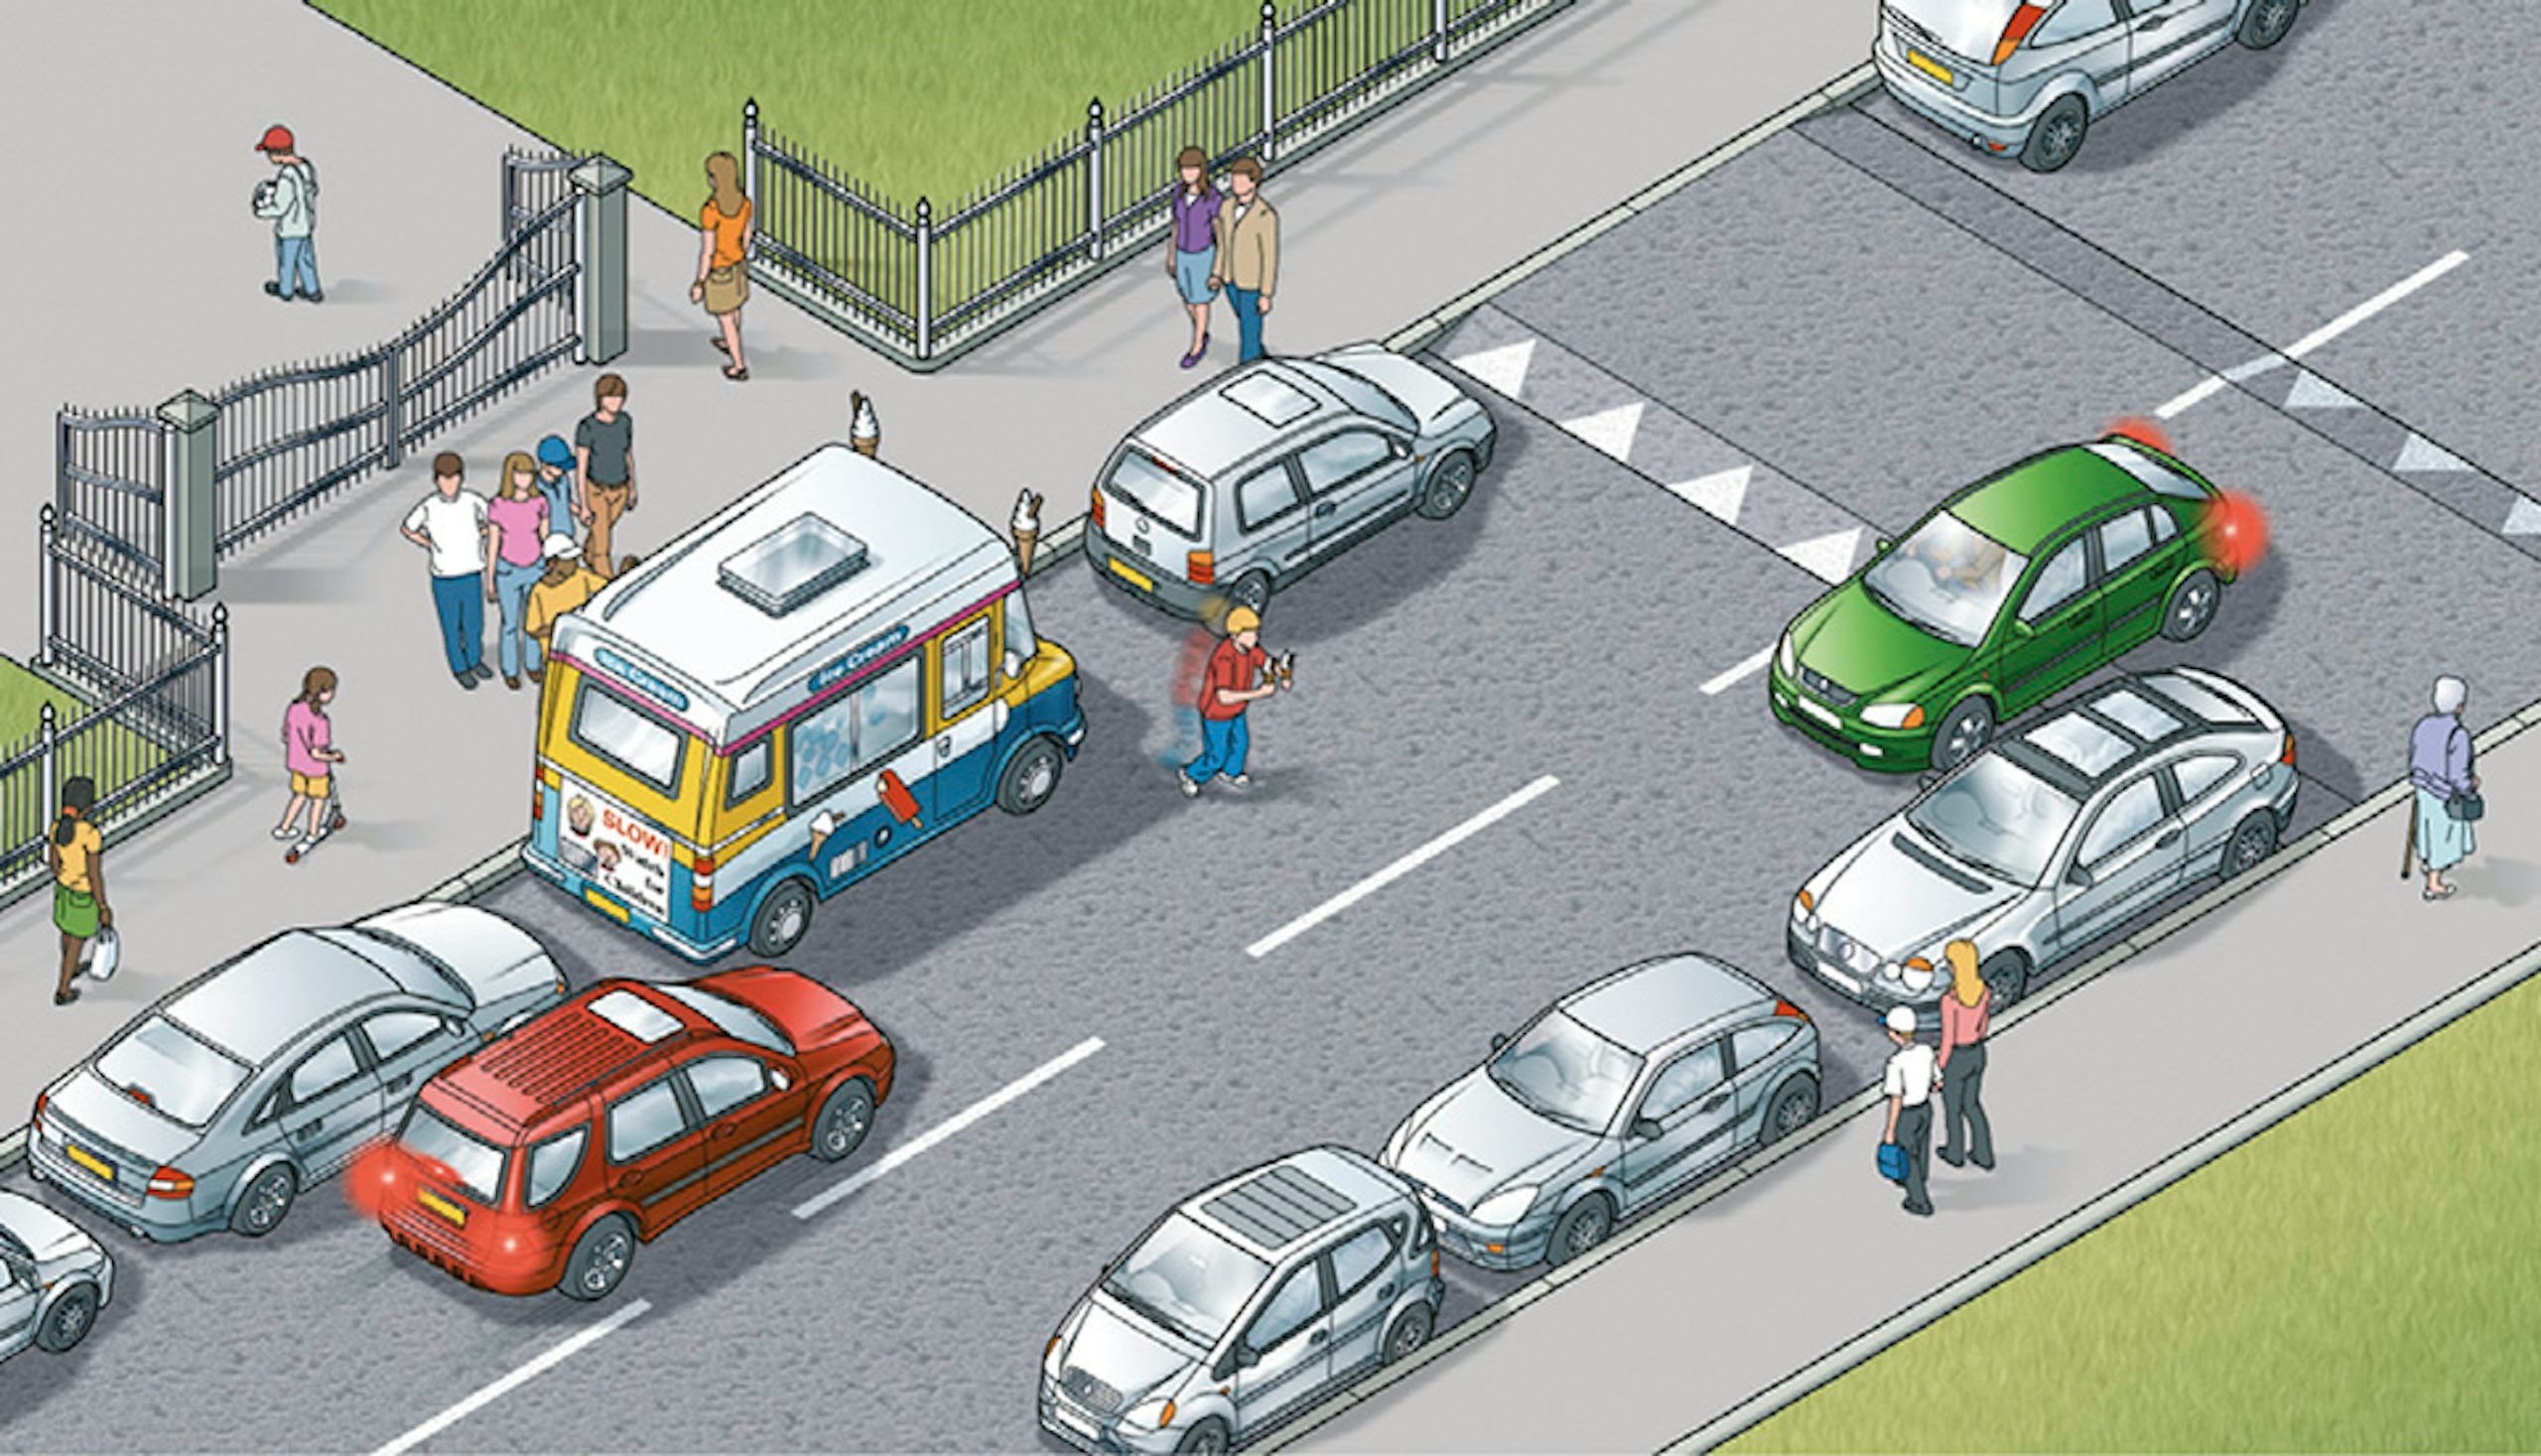 We have road rules for cars, but are there rules for pedestrians?